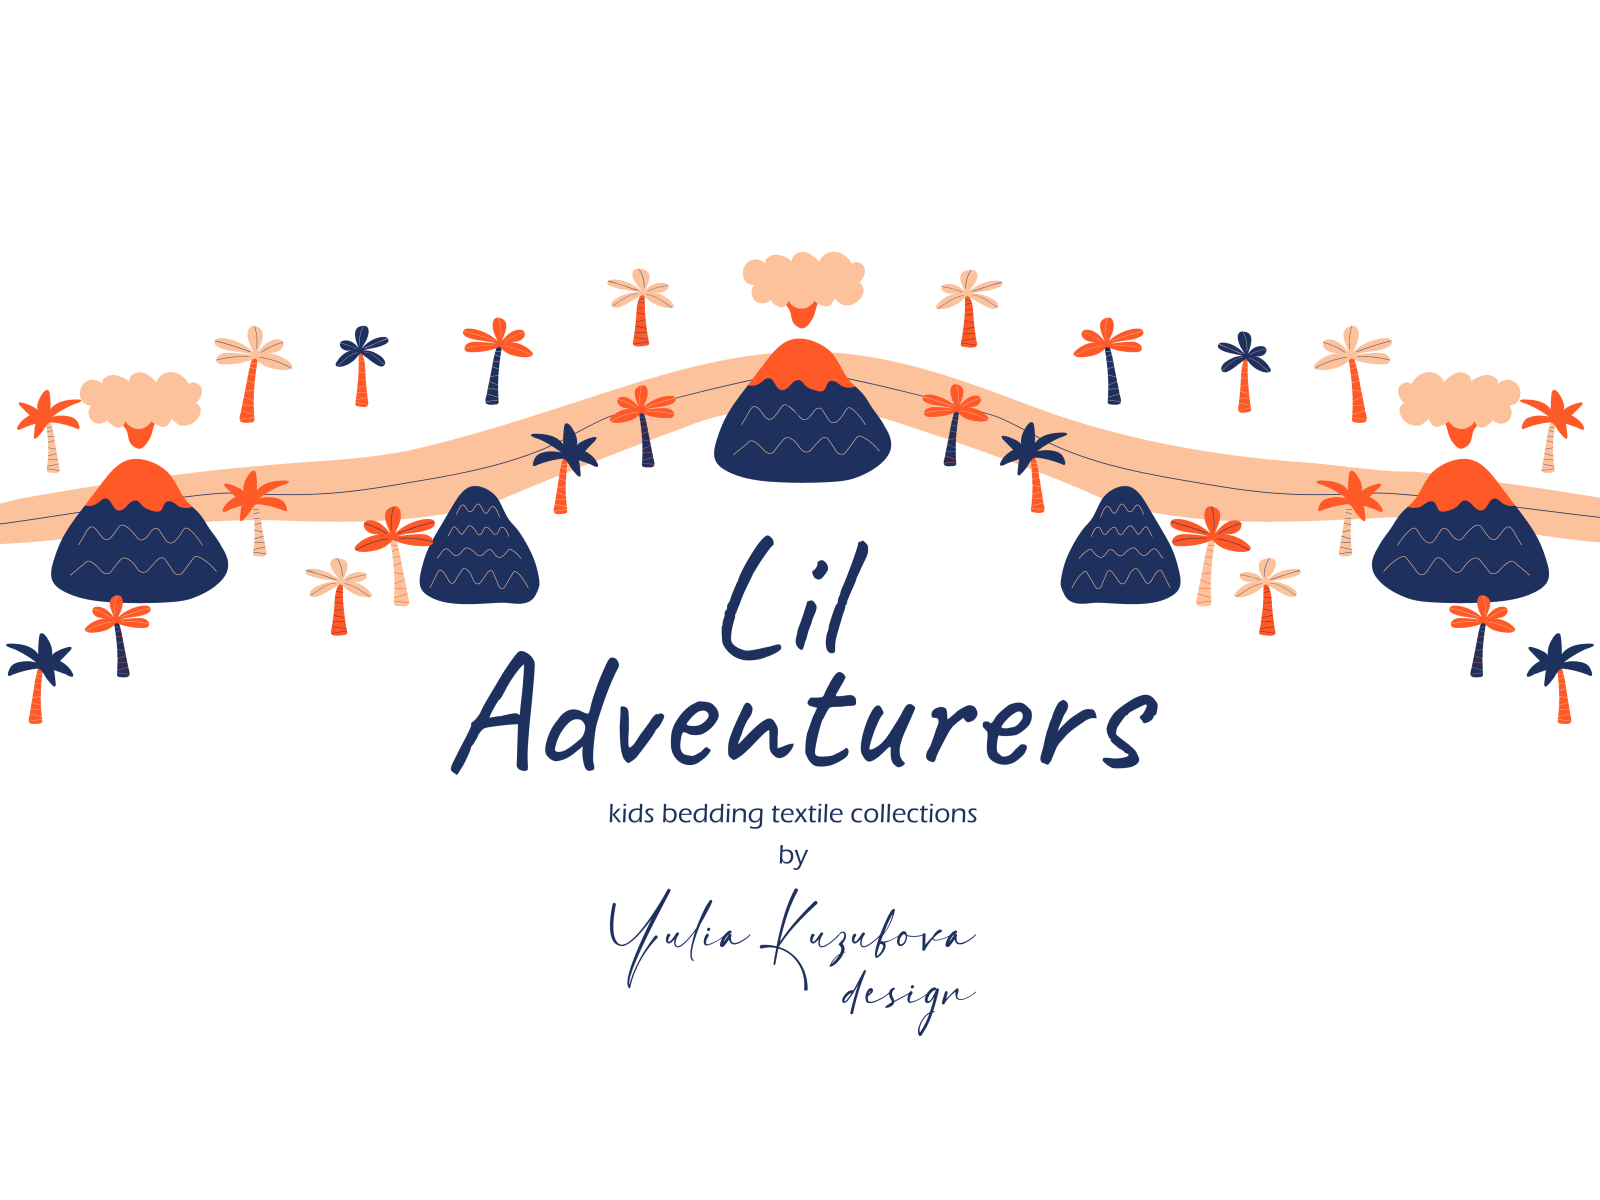 Lil Adventurers
Kids Bedding Textile Collections